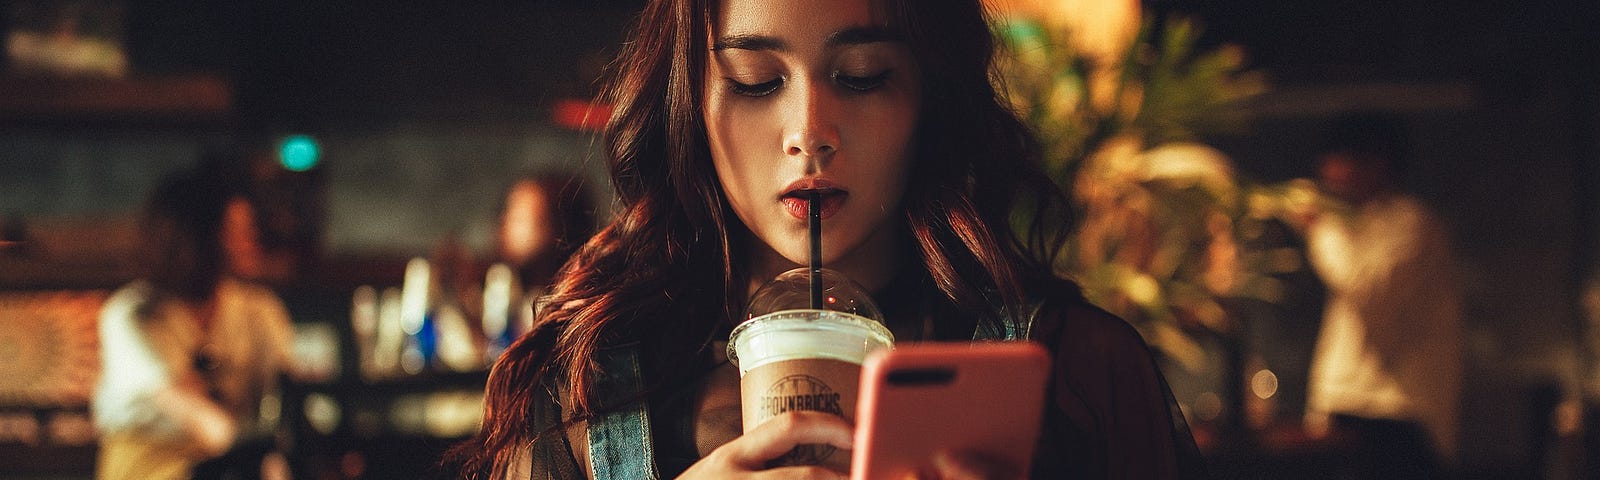 Woman in a cafe sipping coffee through a straw and looking at her phone